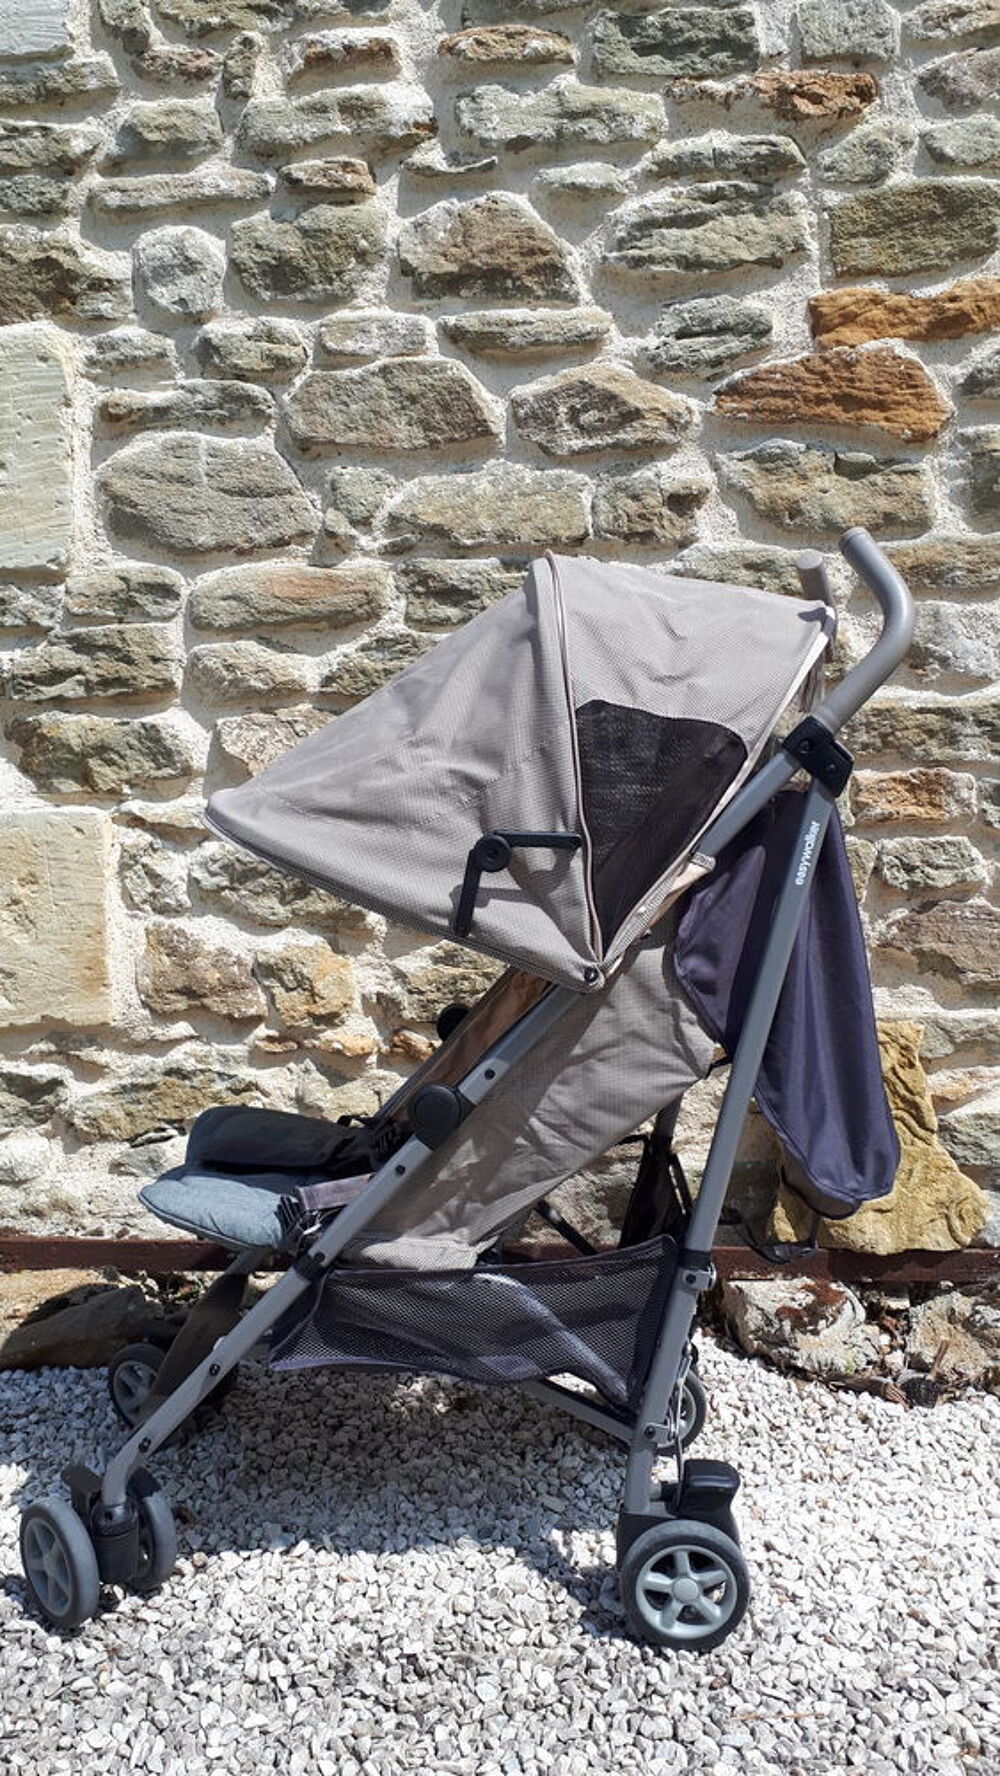 Poussette canne grise et taupe Marque easywalker buggy Puriculture